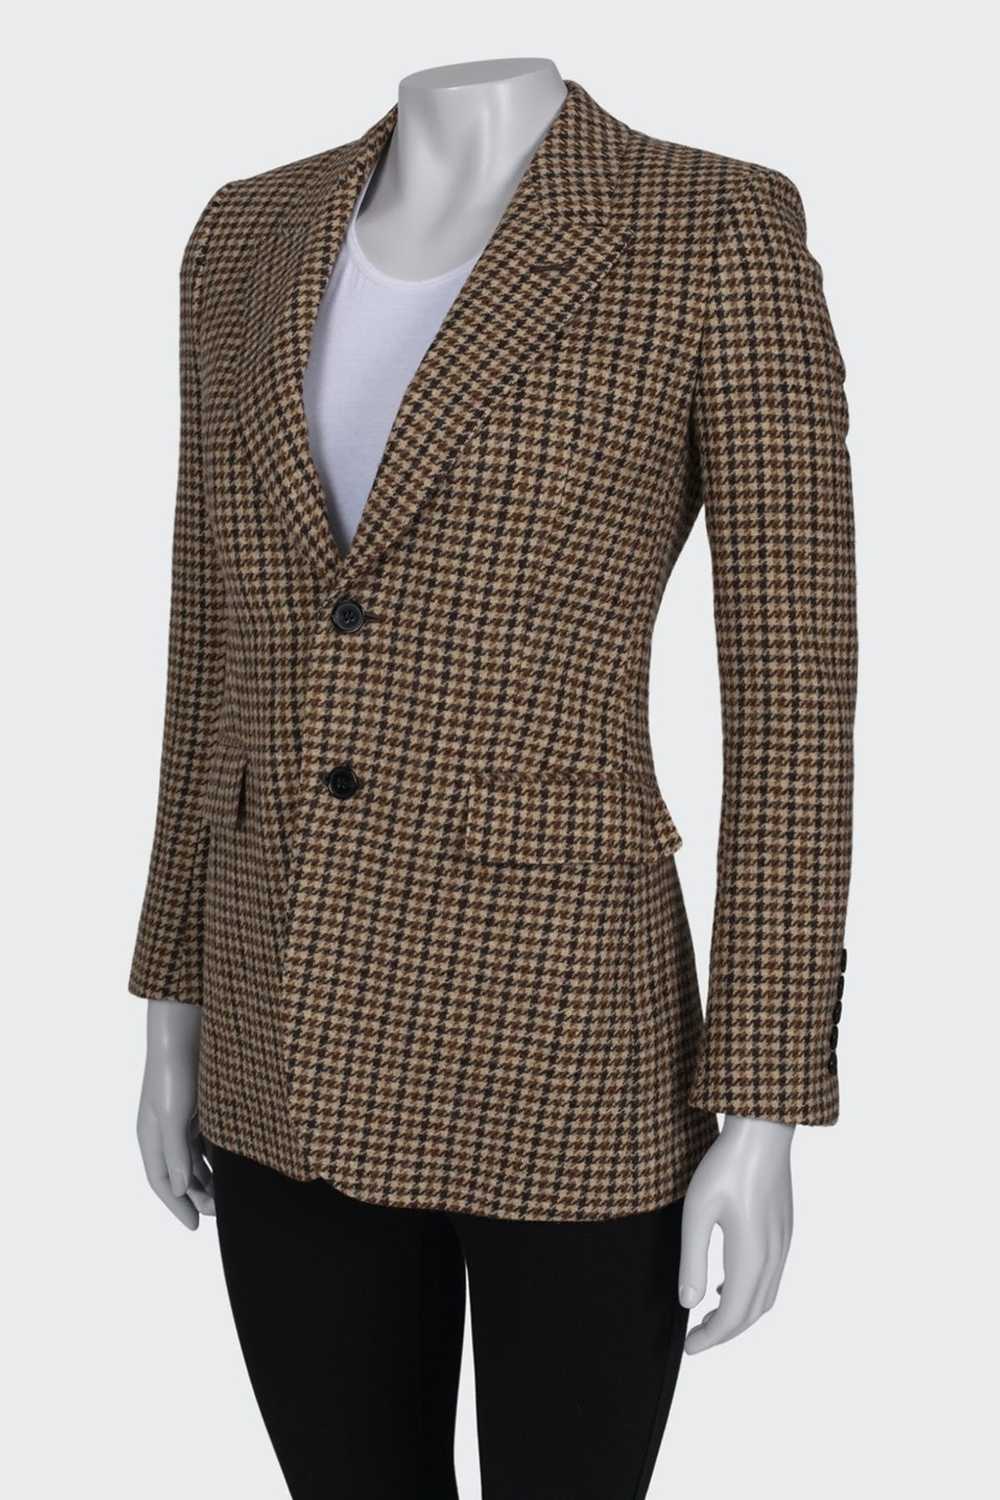 Yves Saint Laurent Jacket with a houndstooth print - image 3